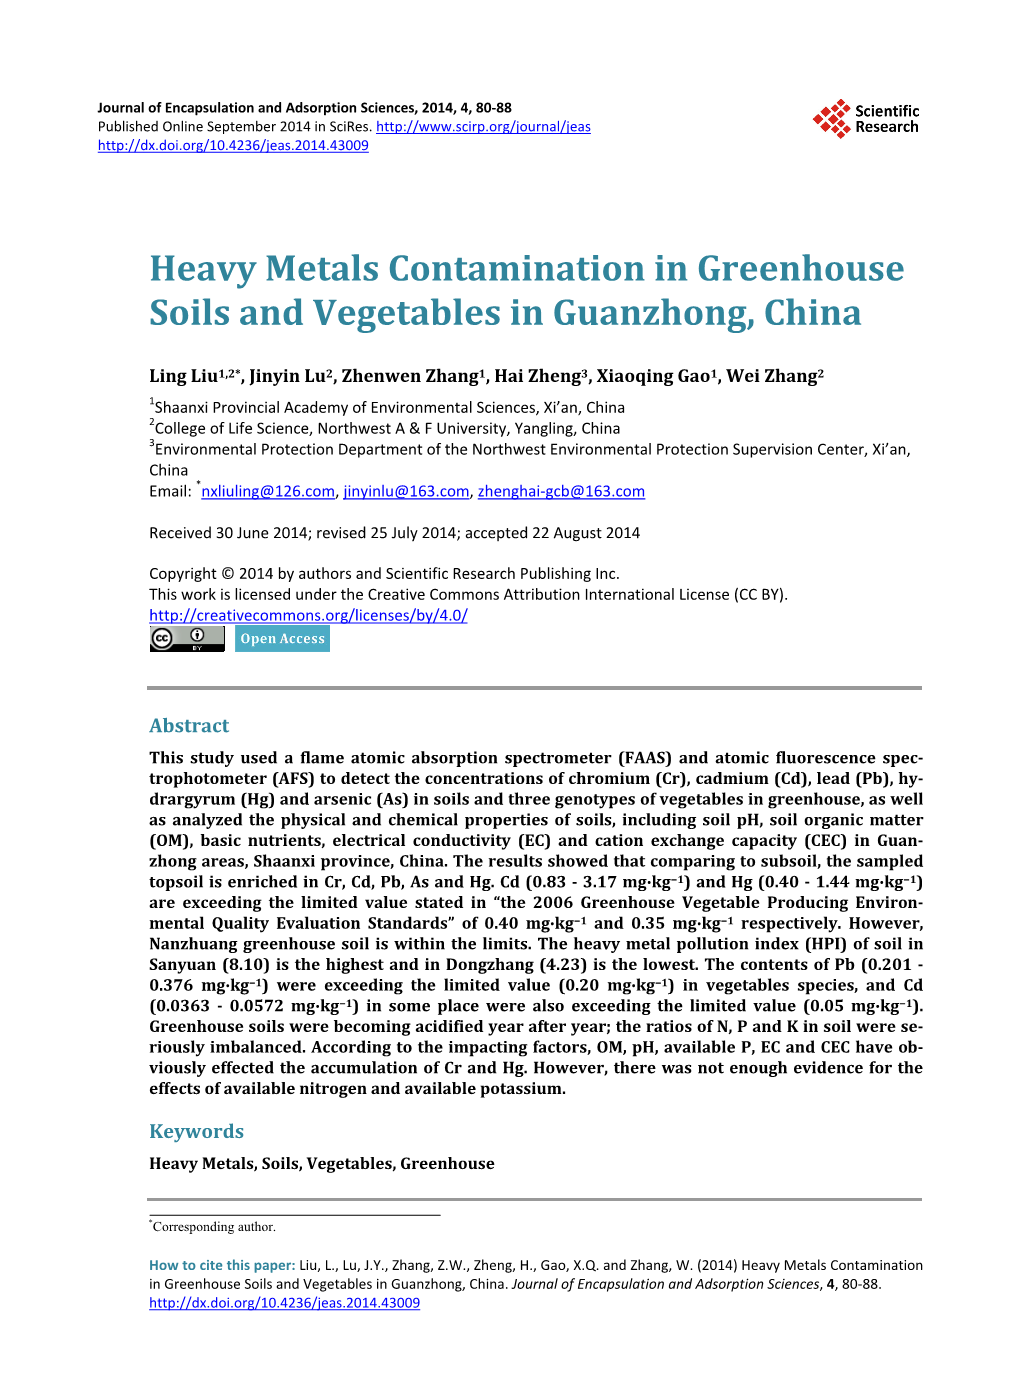 Heavy Metals Contamination in Greenhouse Soils and Vegetables in Guanzhong, China